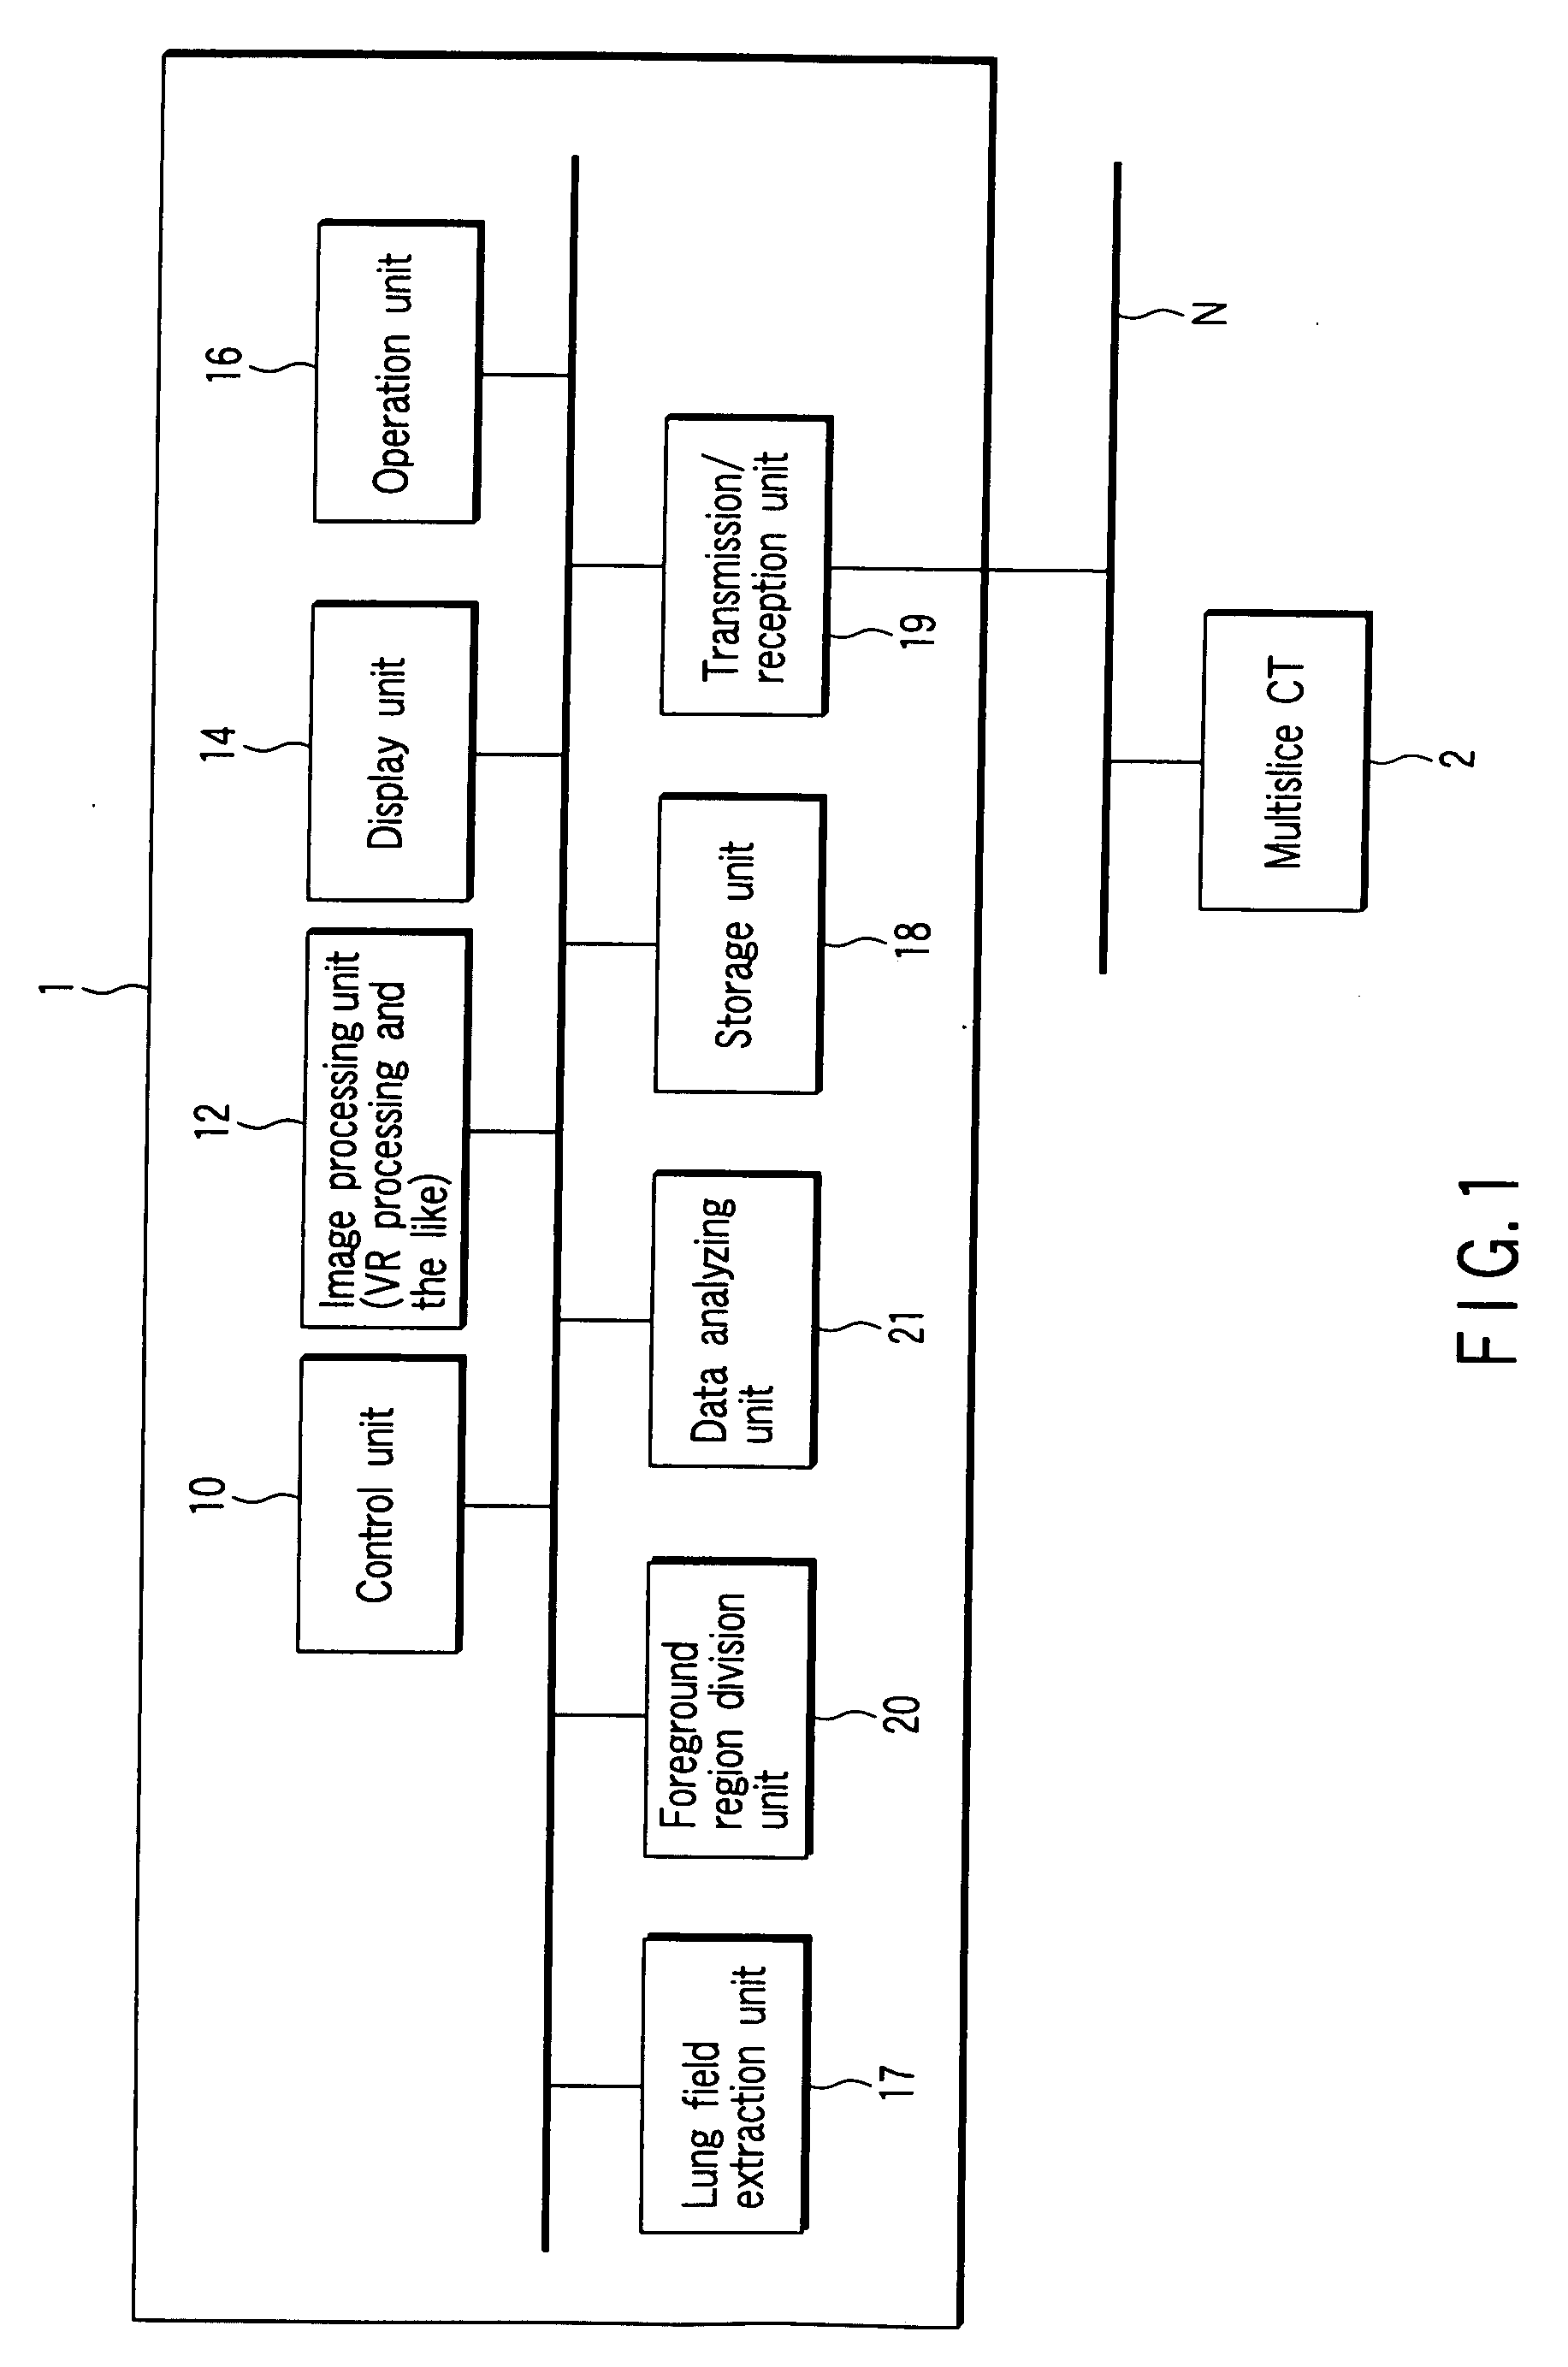 Computer-aided imaging diagnostic processing apparatus and computer-aided imaging diagnostic processing method